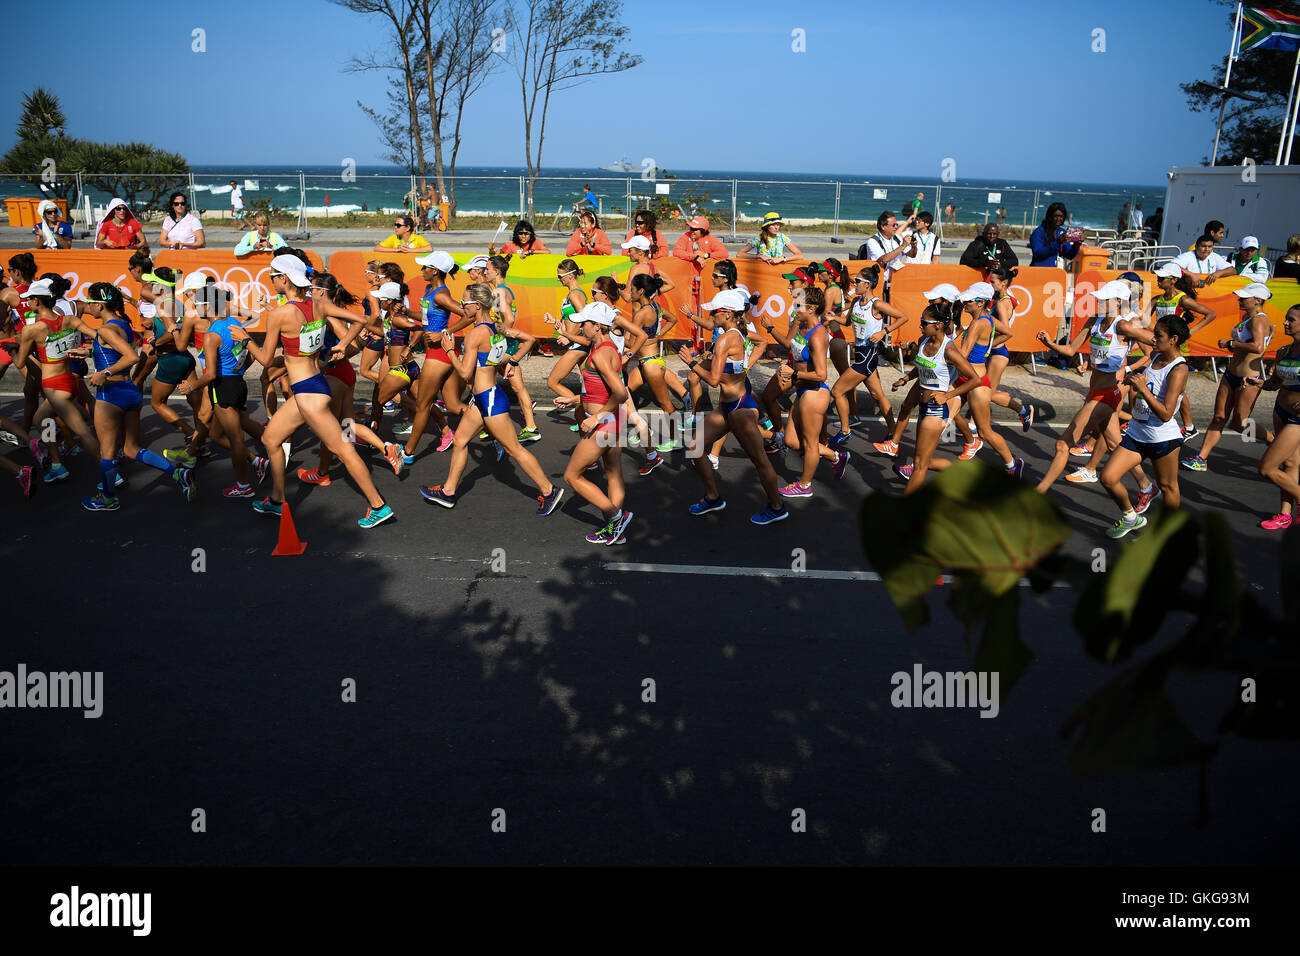 Rio de Janeiro, Brazil. 19th August, 2016. athletes on the route during the womens 20km race walk on Day 14 of the 2016 Rio Olympics at Pontal on August 19, 2016 in Rio de Janeiro, Brazil. (Photo by Roger Sedres/Gallo Images) Credit:  Roger Sedres/Alamy Live News Stock Photo